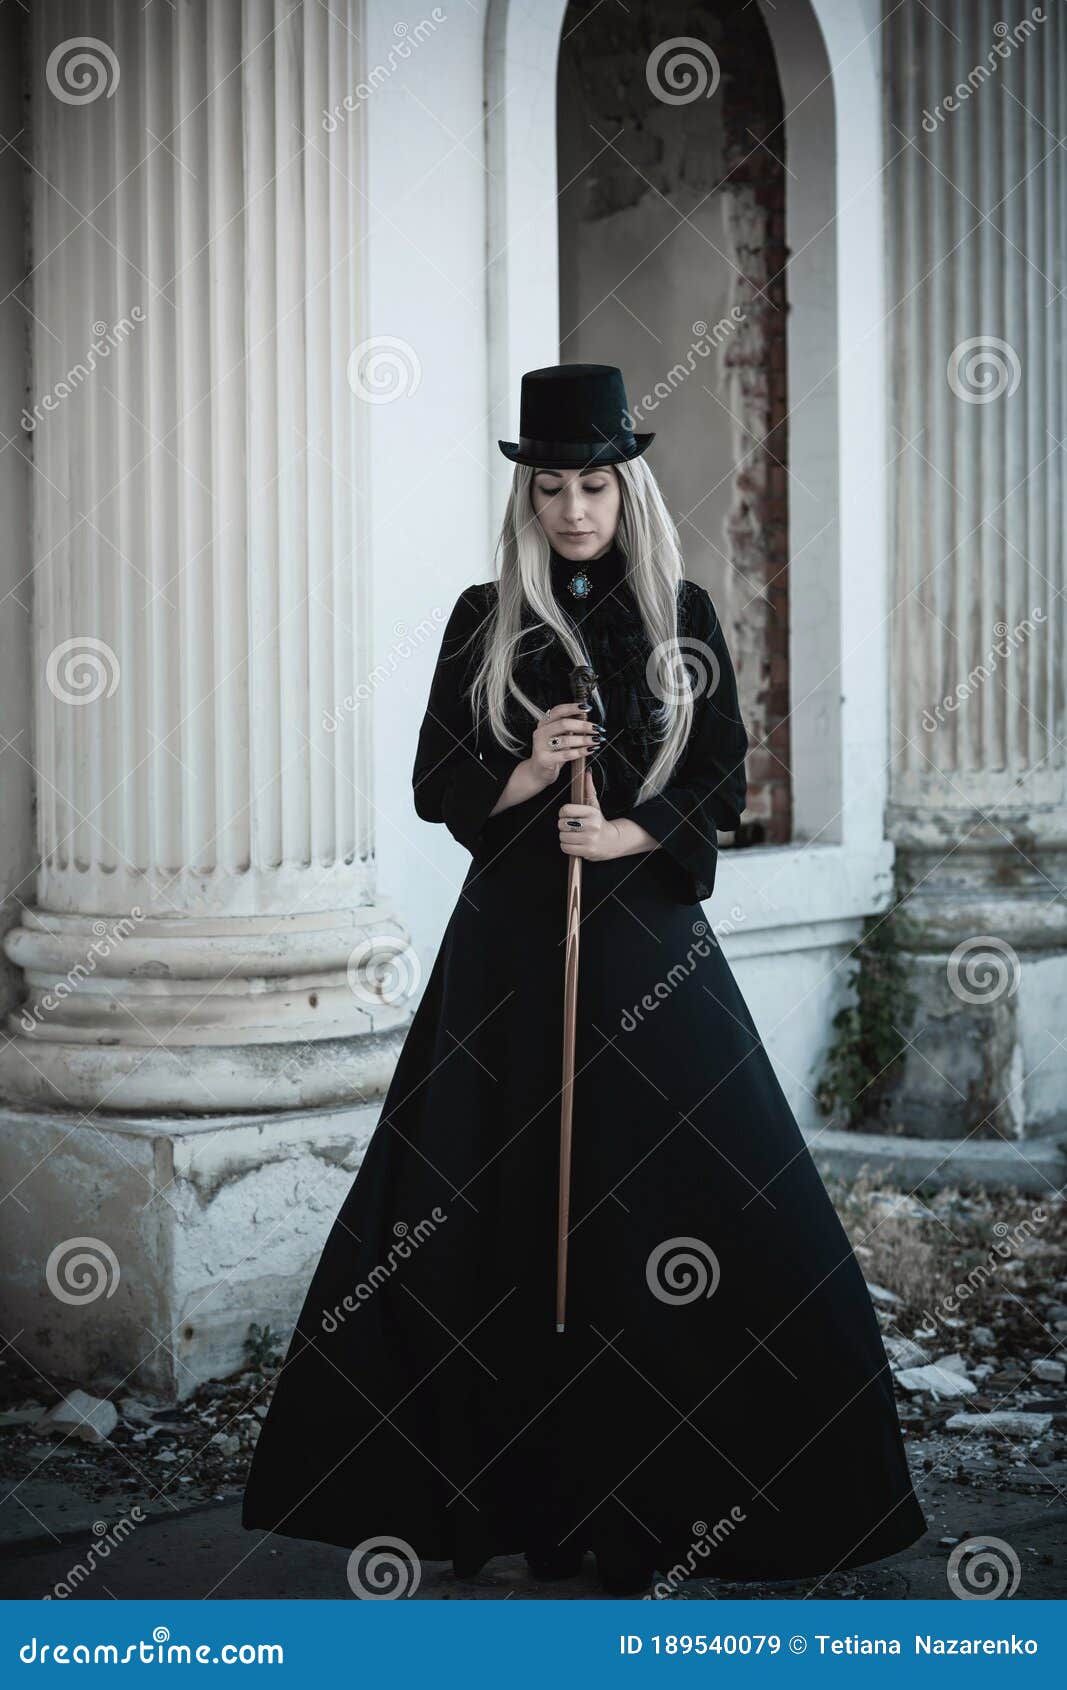 Victorian Classical Woman Goth, Gothic Style Stock Image - Image